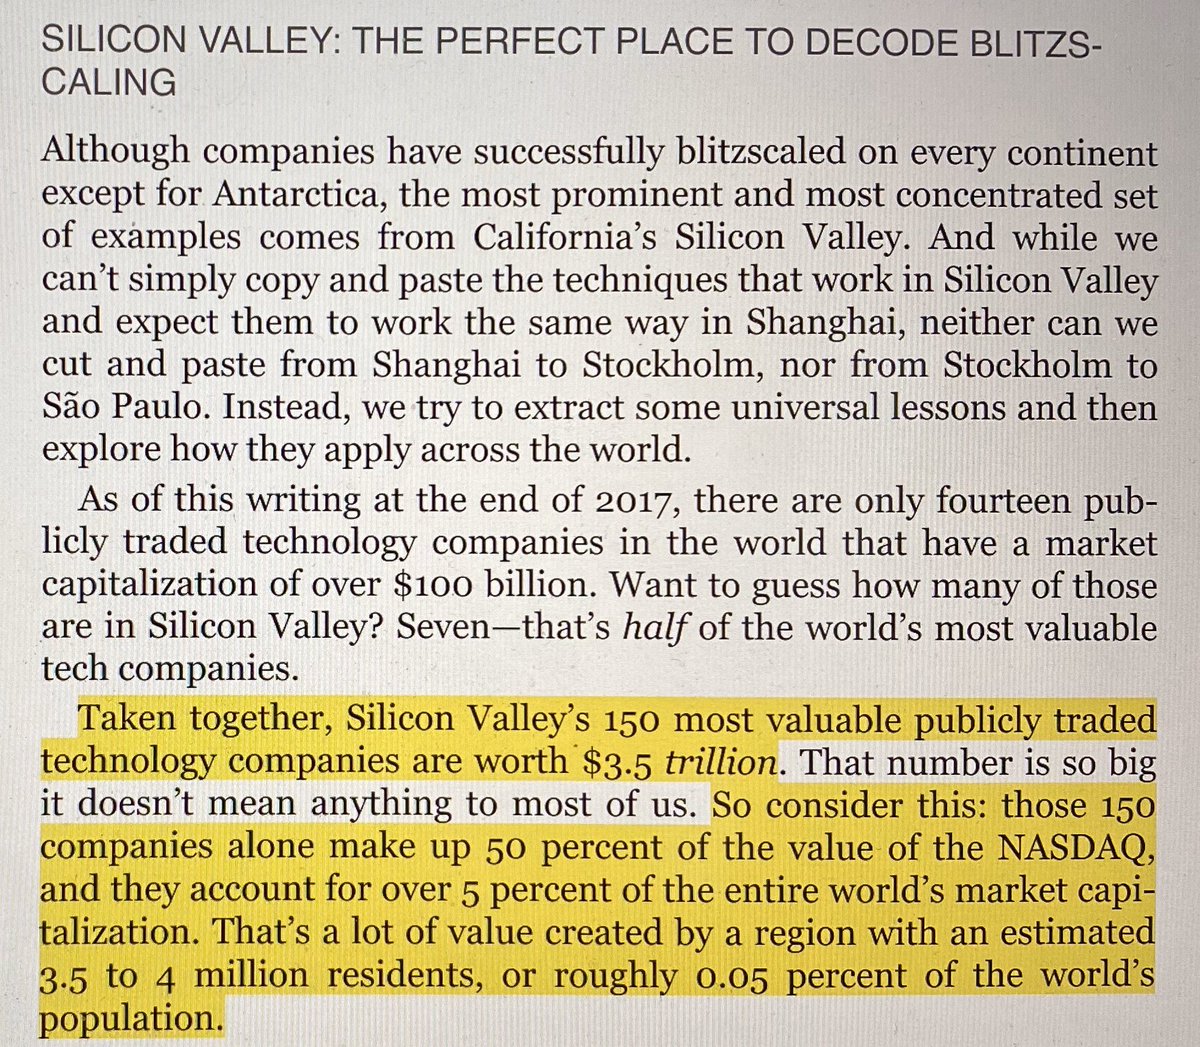 “Silicon Valley’s 150 most valuable publicly traded technology companies ... account for over 5% of the entire world’s market capitalization. That’s a lot of value created by a region with an estimated 3.5 to 4 million residents, or roughly 0.05% of the world’s population.”